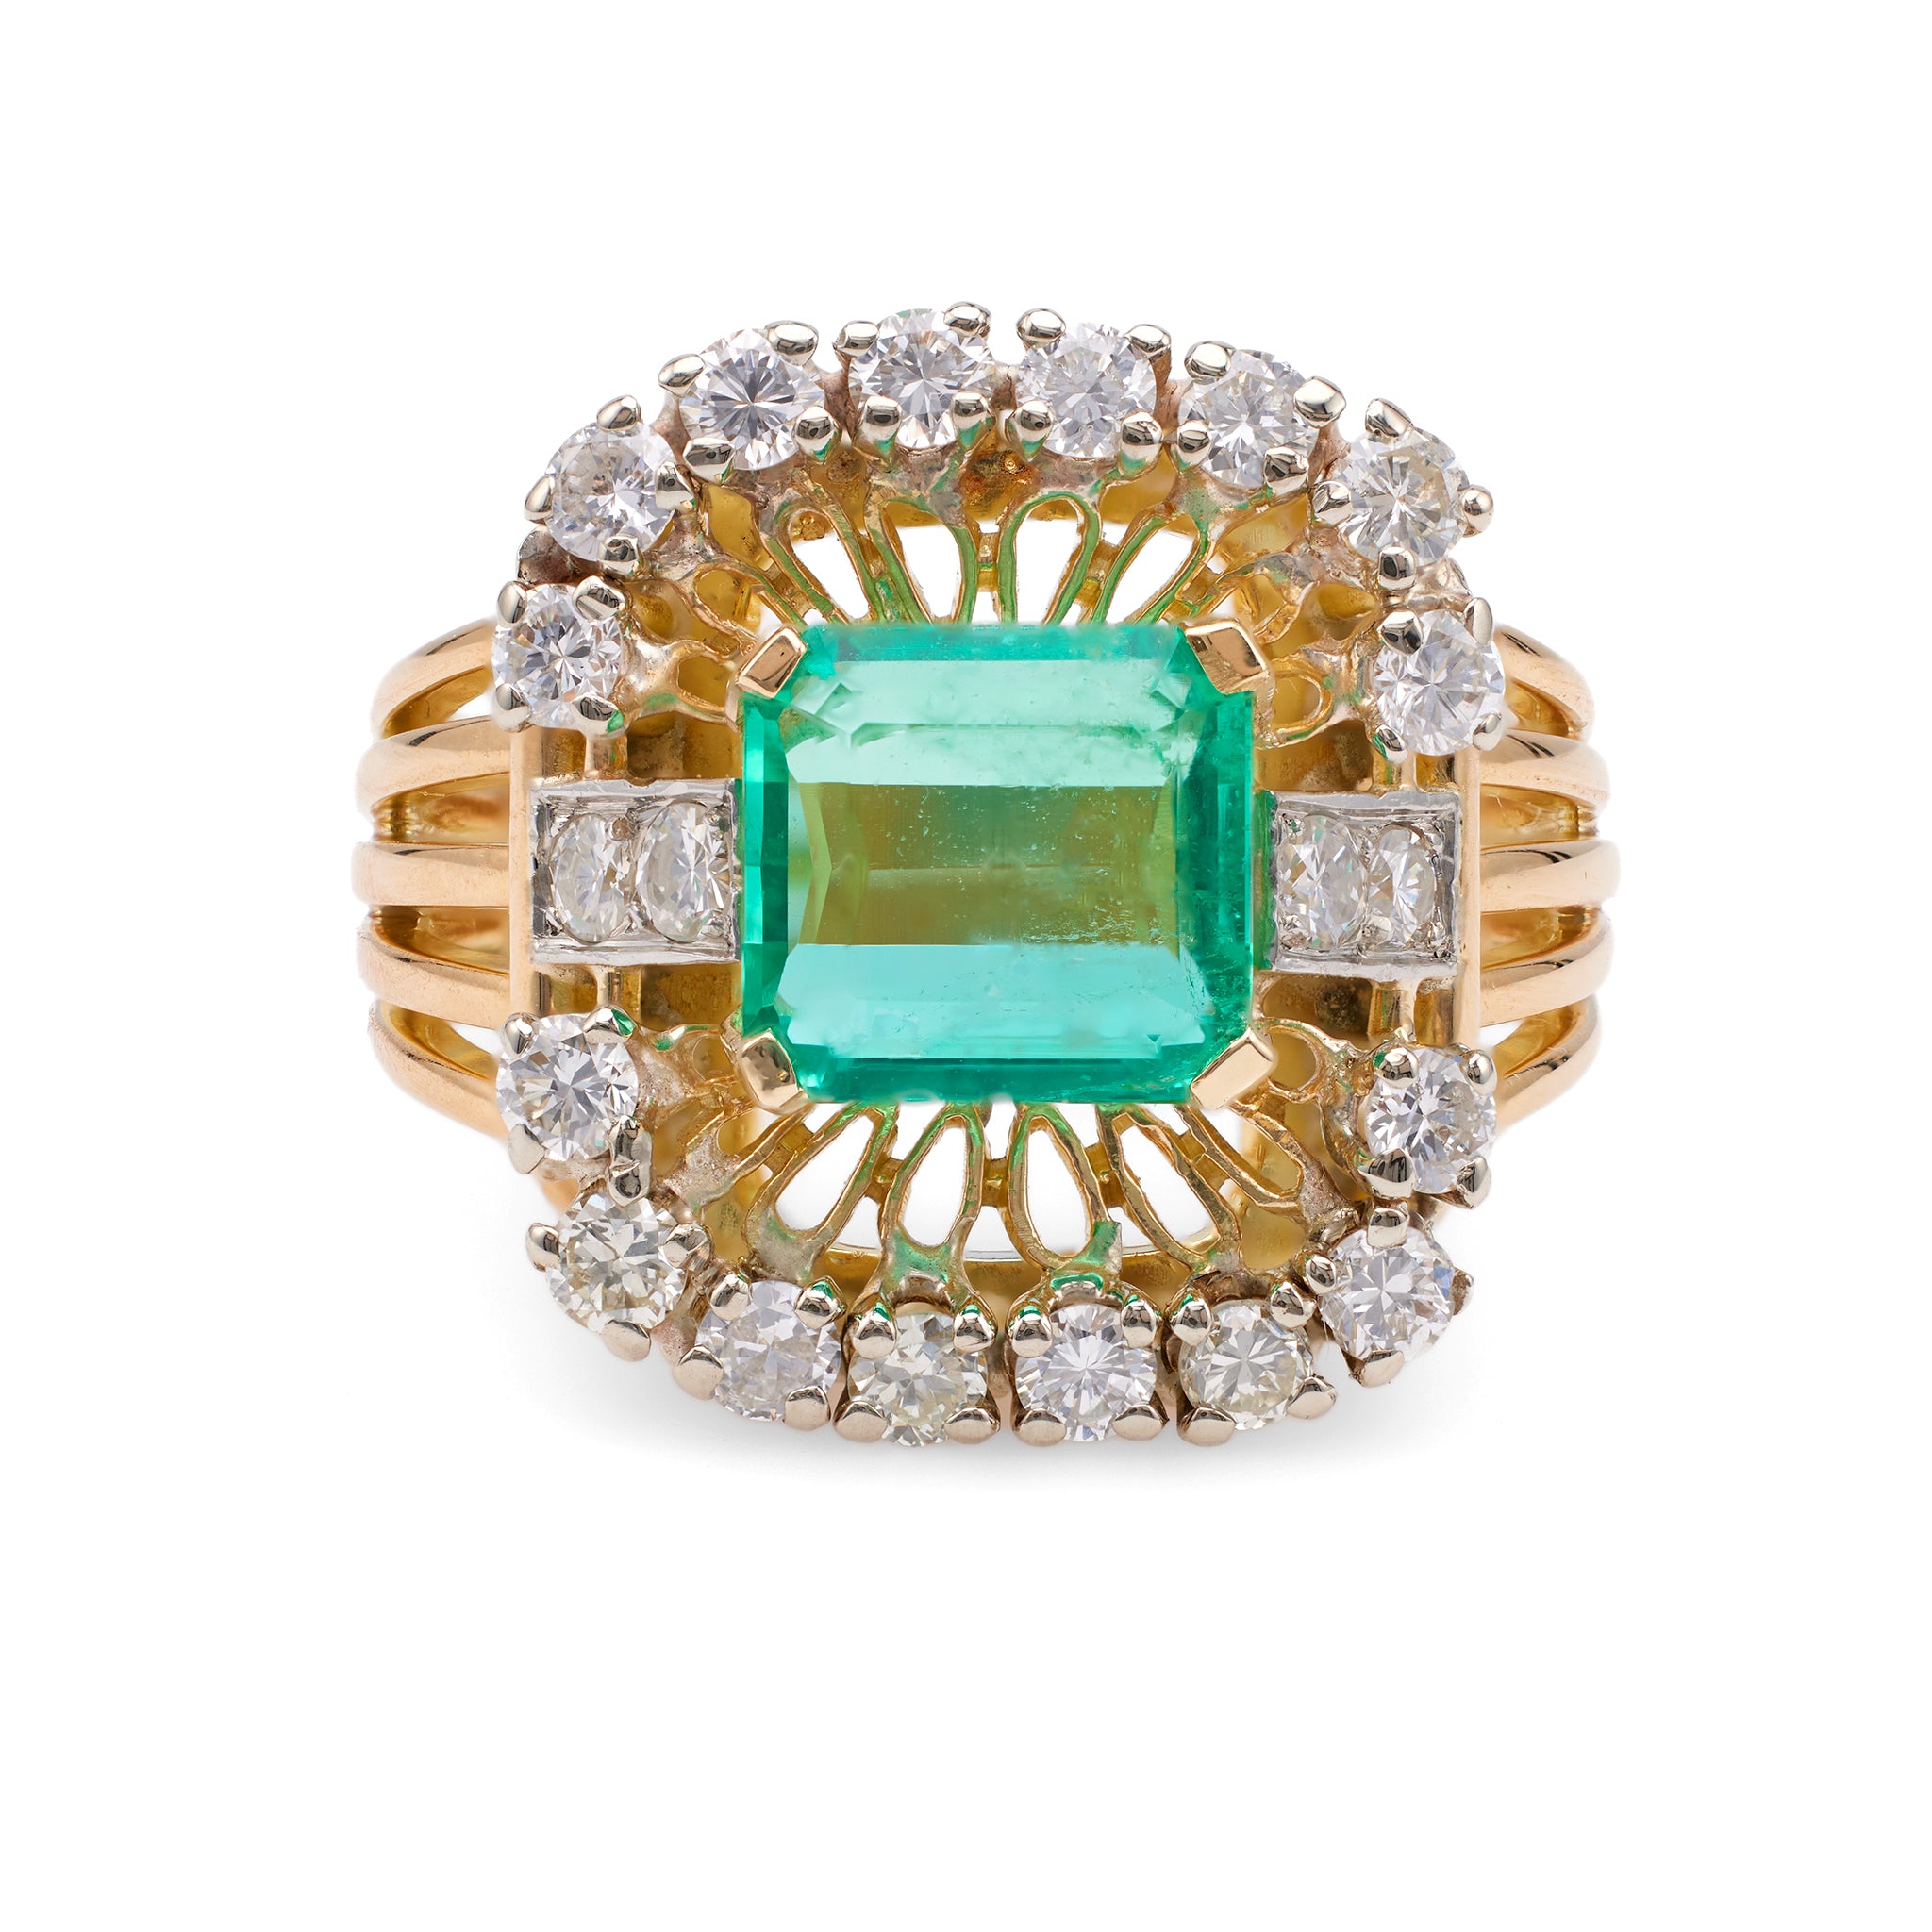 Retro French GIA 2.68 Carat Colombian Emerald Diamond 18k Yellow Gold Cocktail Ring Rings Jack Weir & Sons   